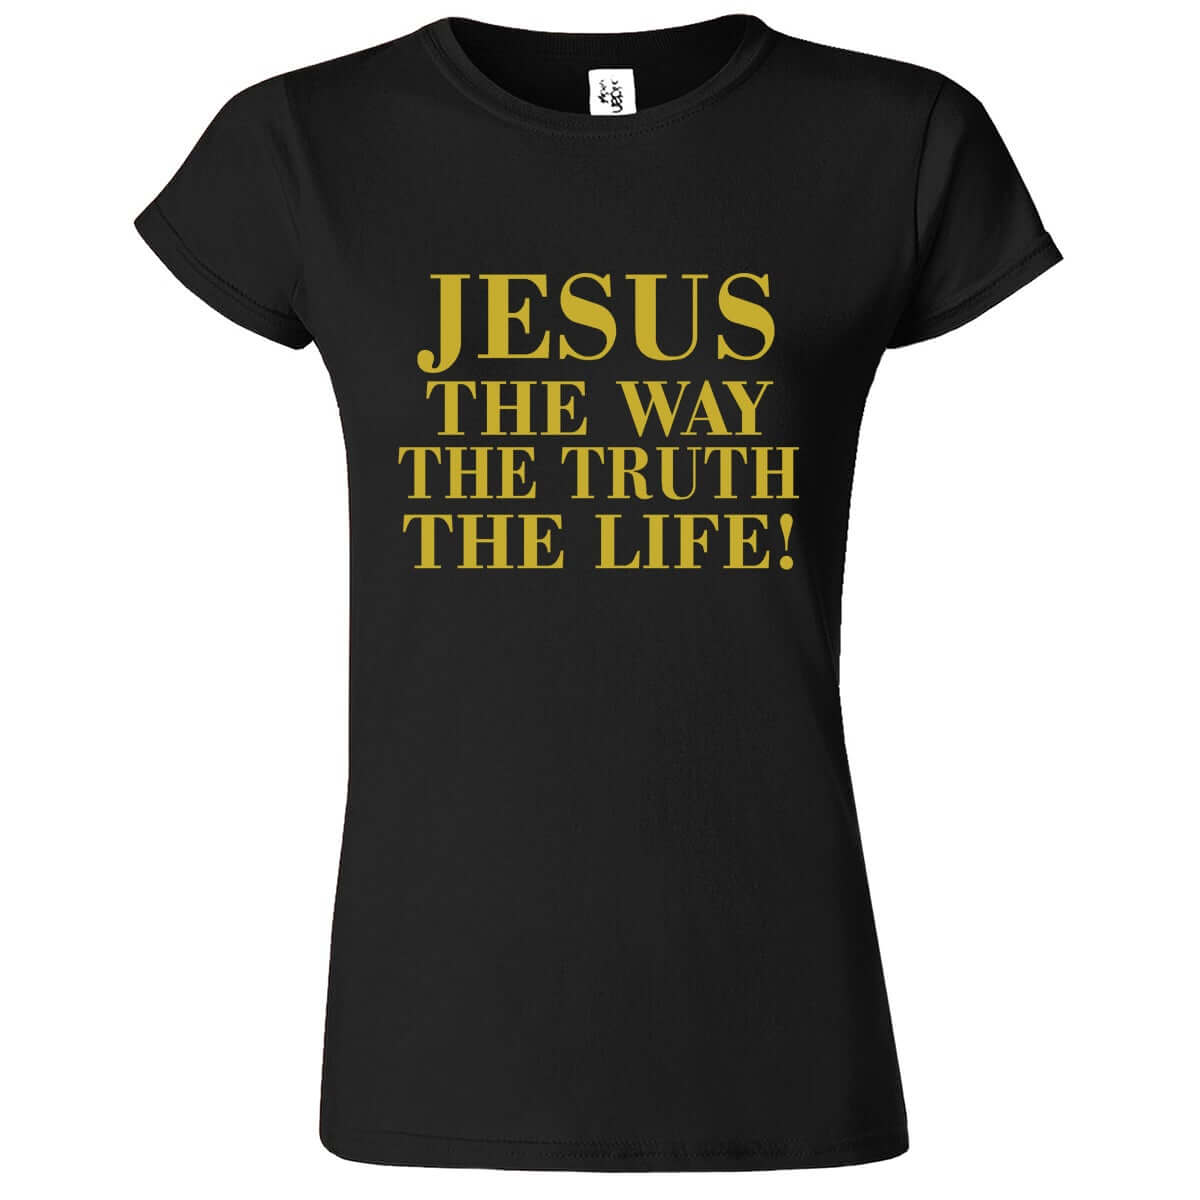 Jesus Way Truth Life Printed T-Shirt for Women's - ApparelinClick